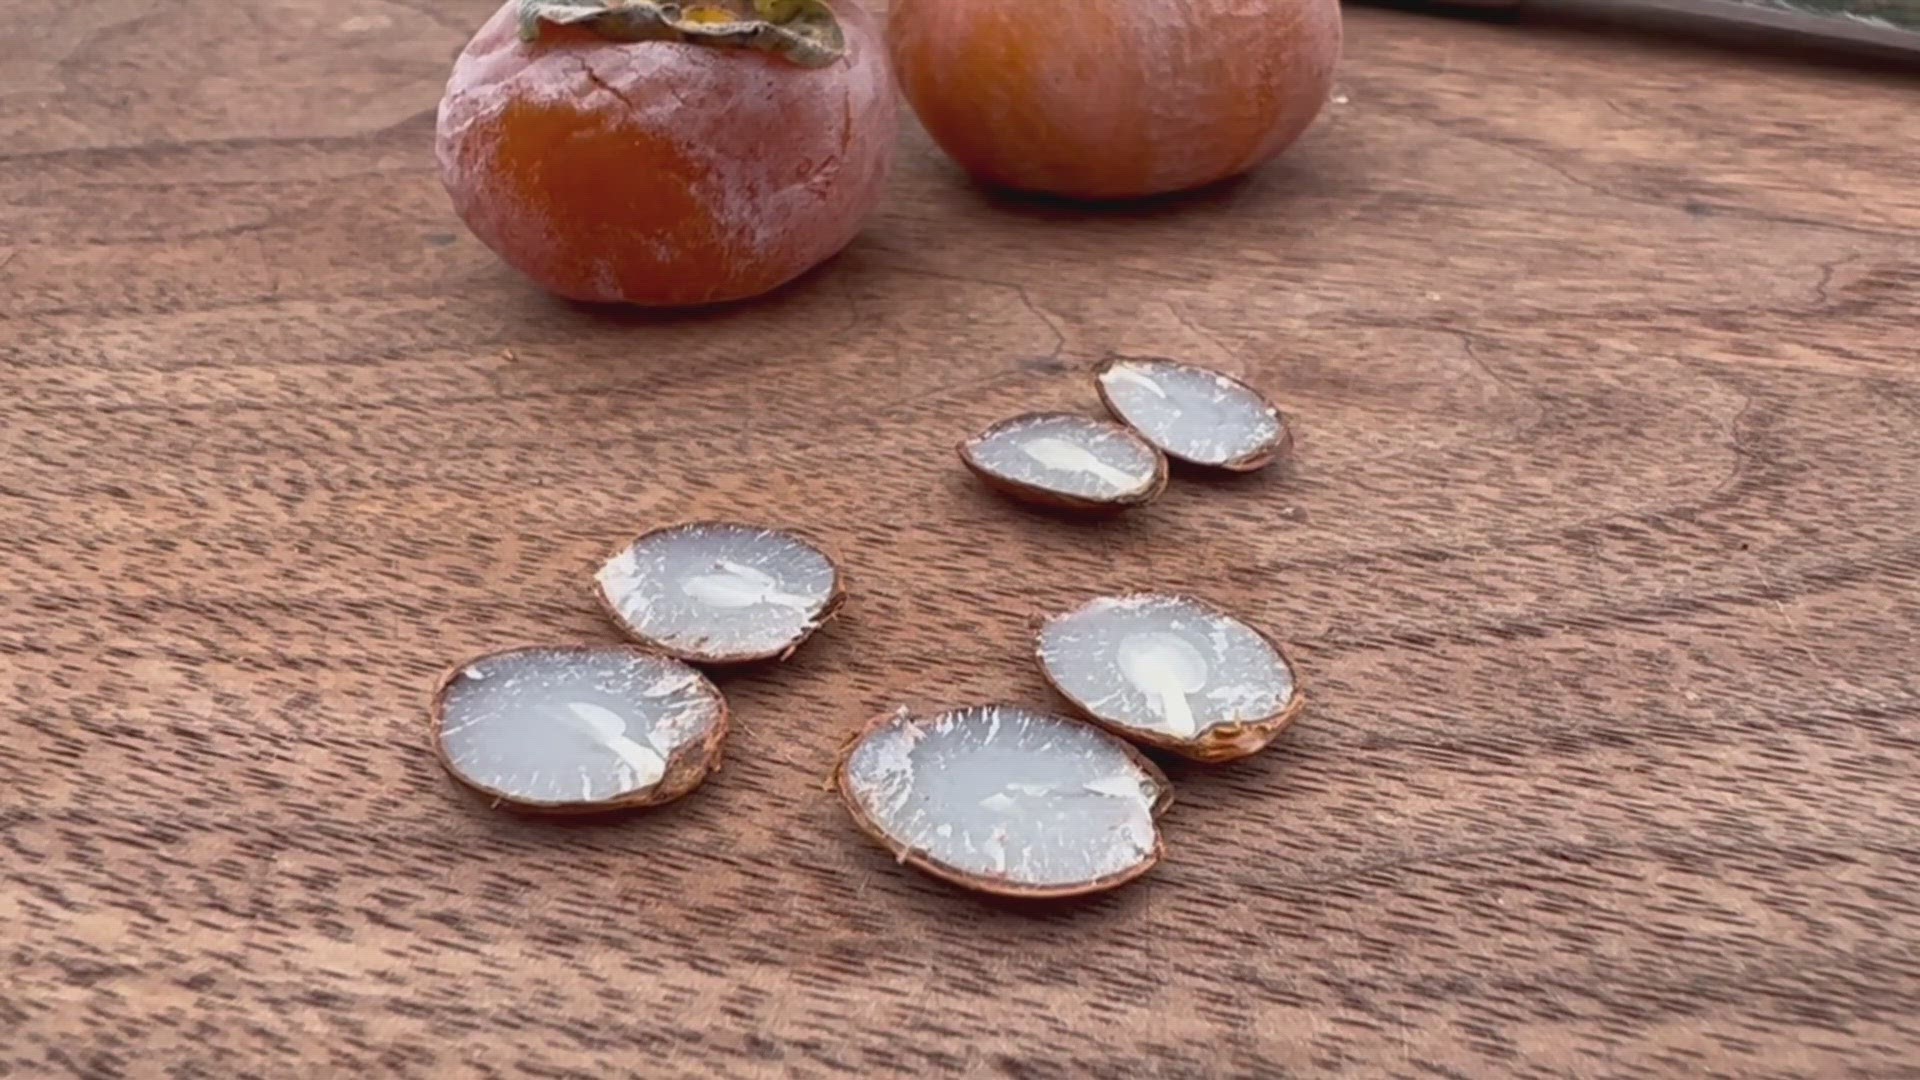 Snowy winter coming for Missouri, persimmon seeds say